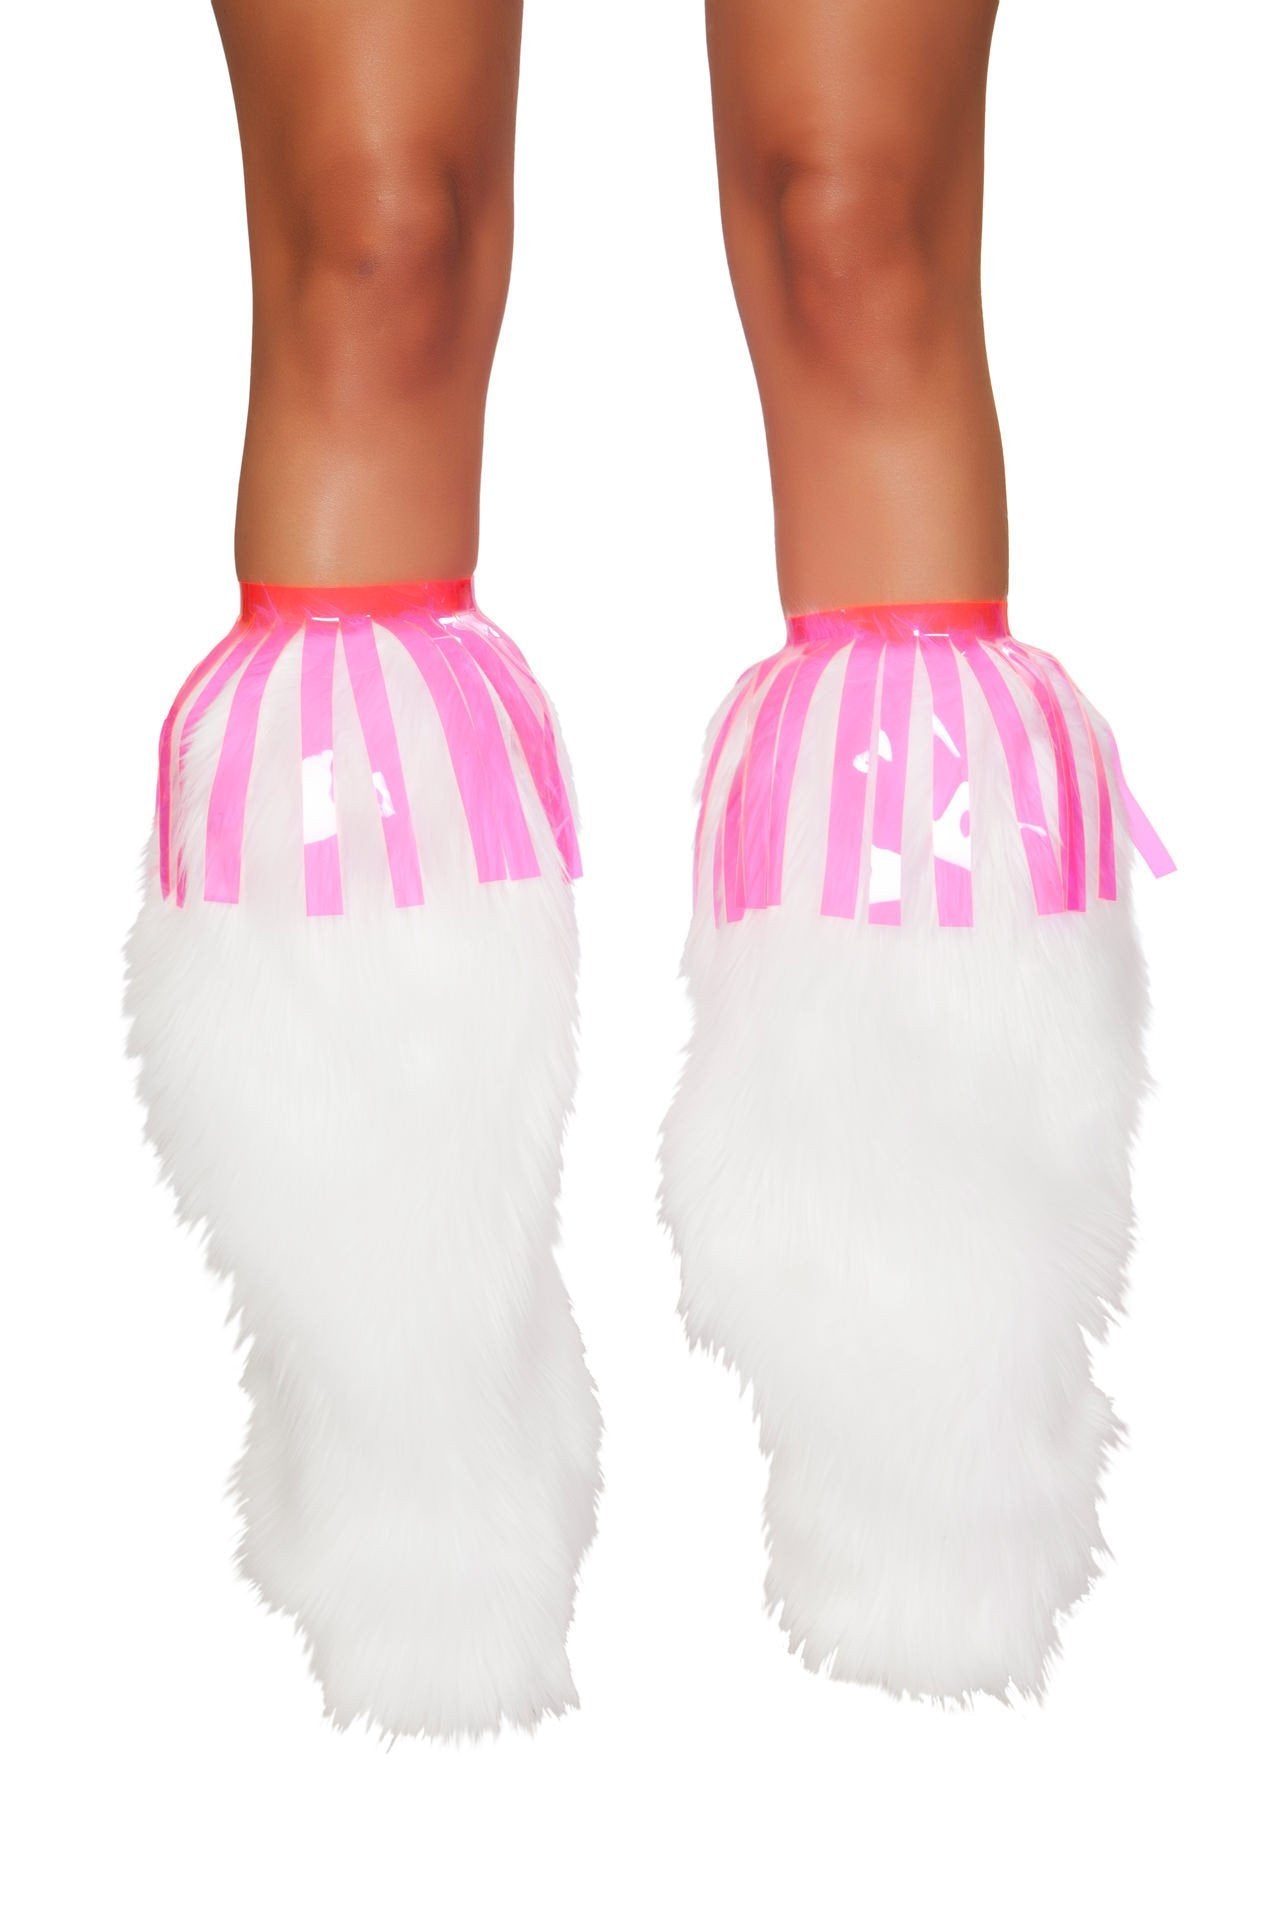 Buy Pair of Vinyl Fringe Leg Wrap from RomaRetailShop for 11.25 with Same Day Shipping Designed by Roma Costume 3242-AS-O/S